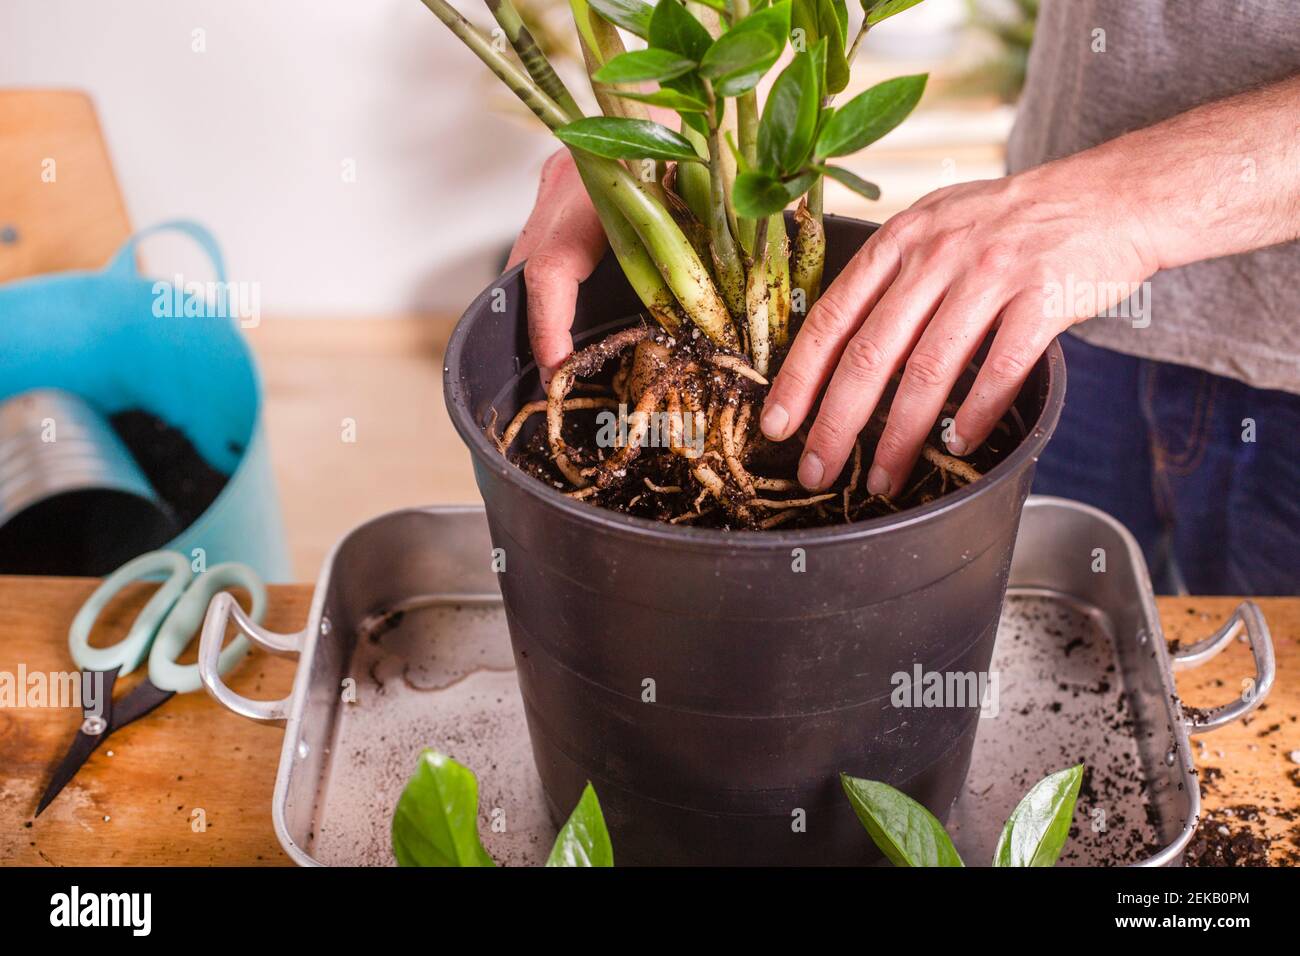 Man planting roots of Zamioculcas Zamiifolia plant in flower pot while standing at home Stock Photo